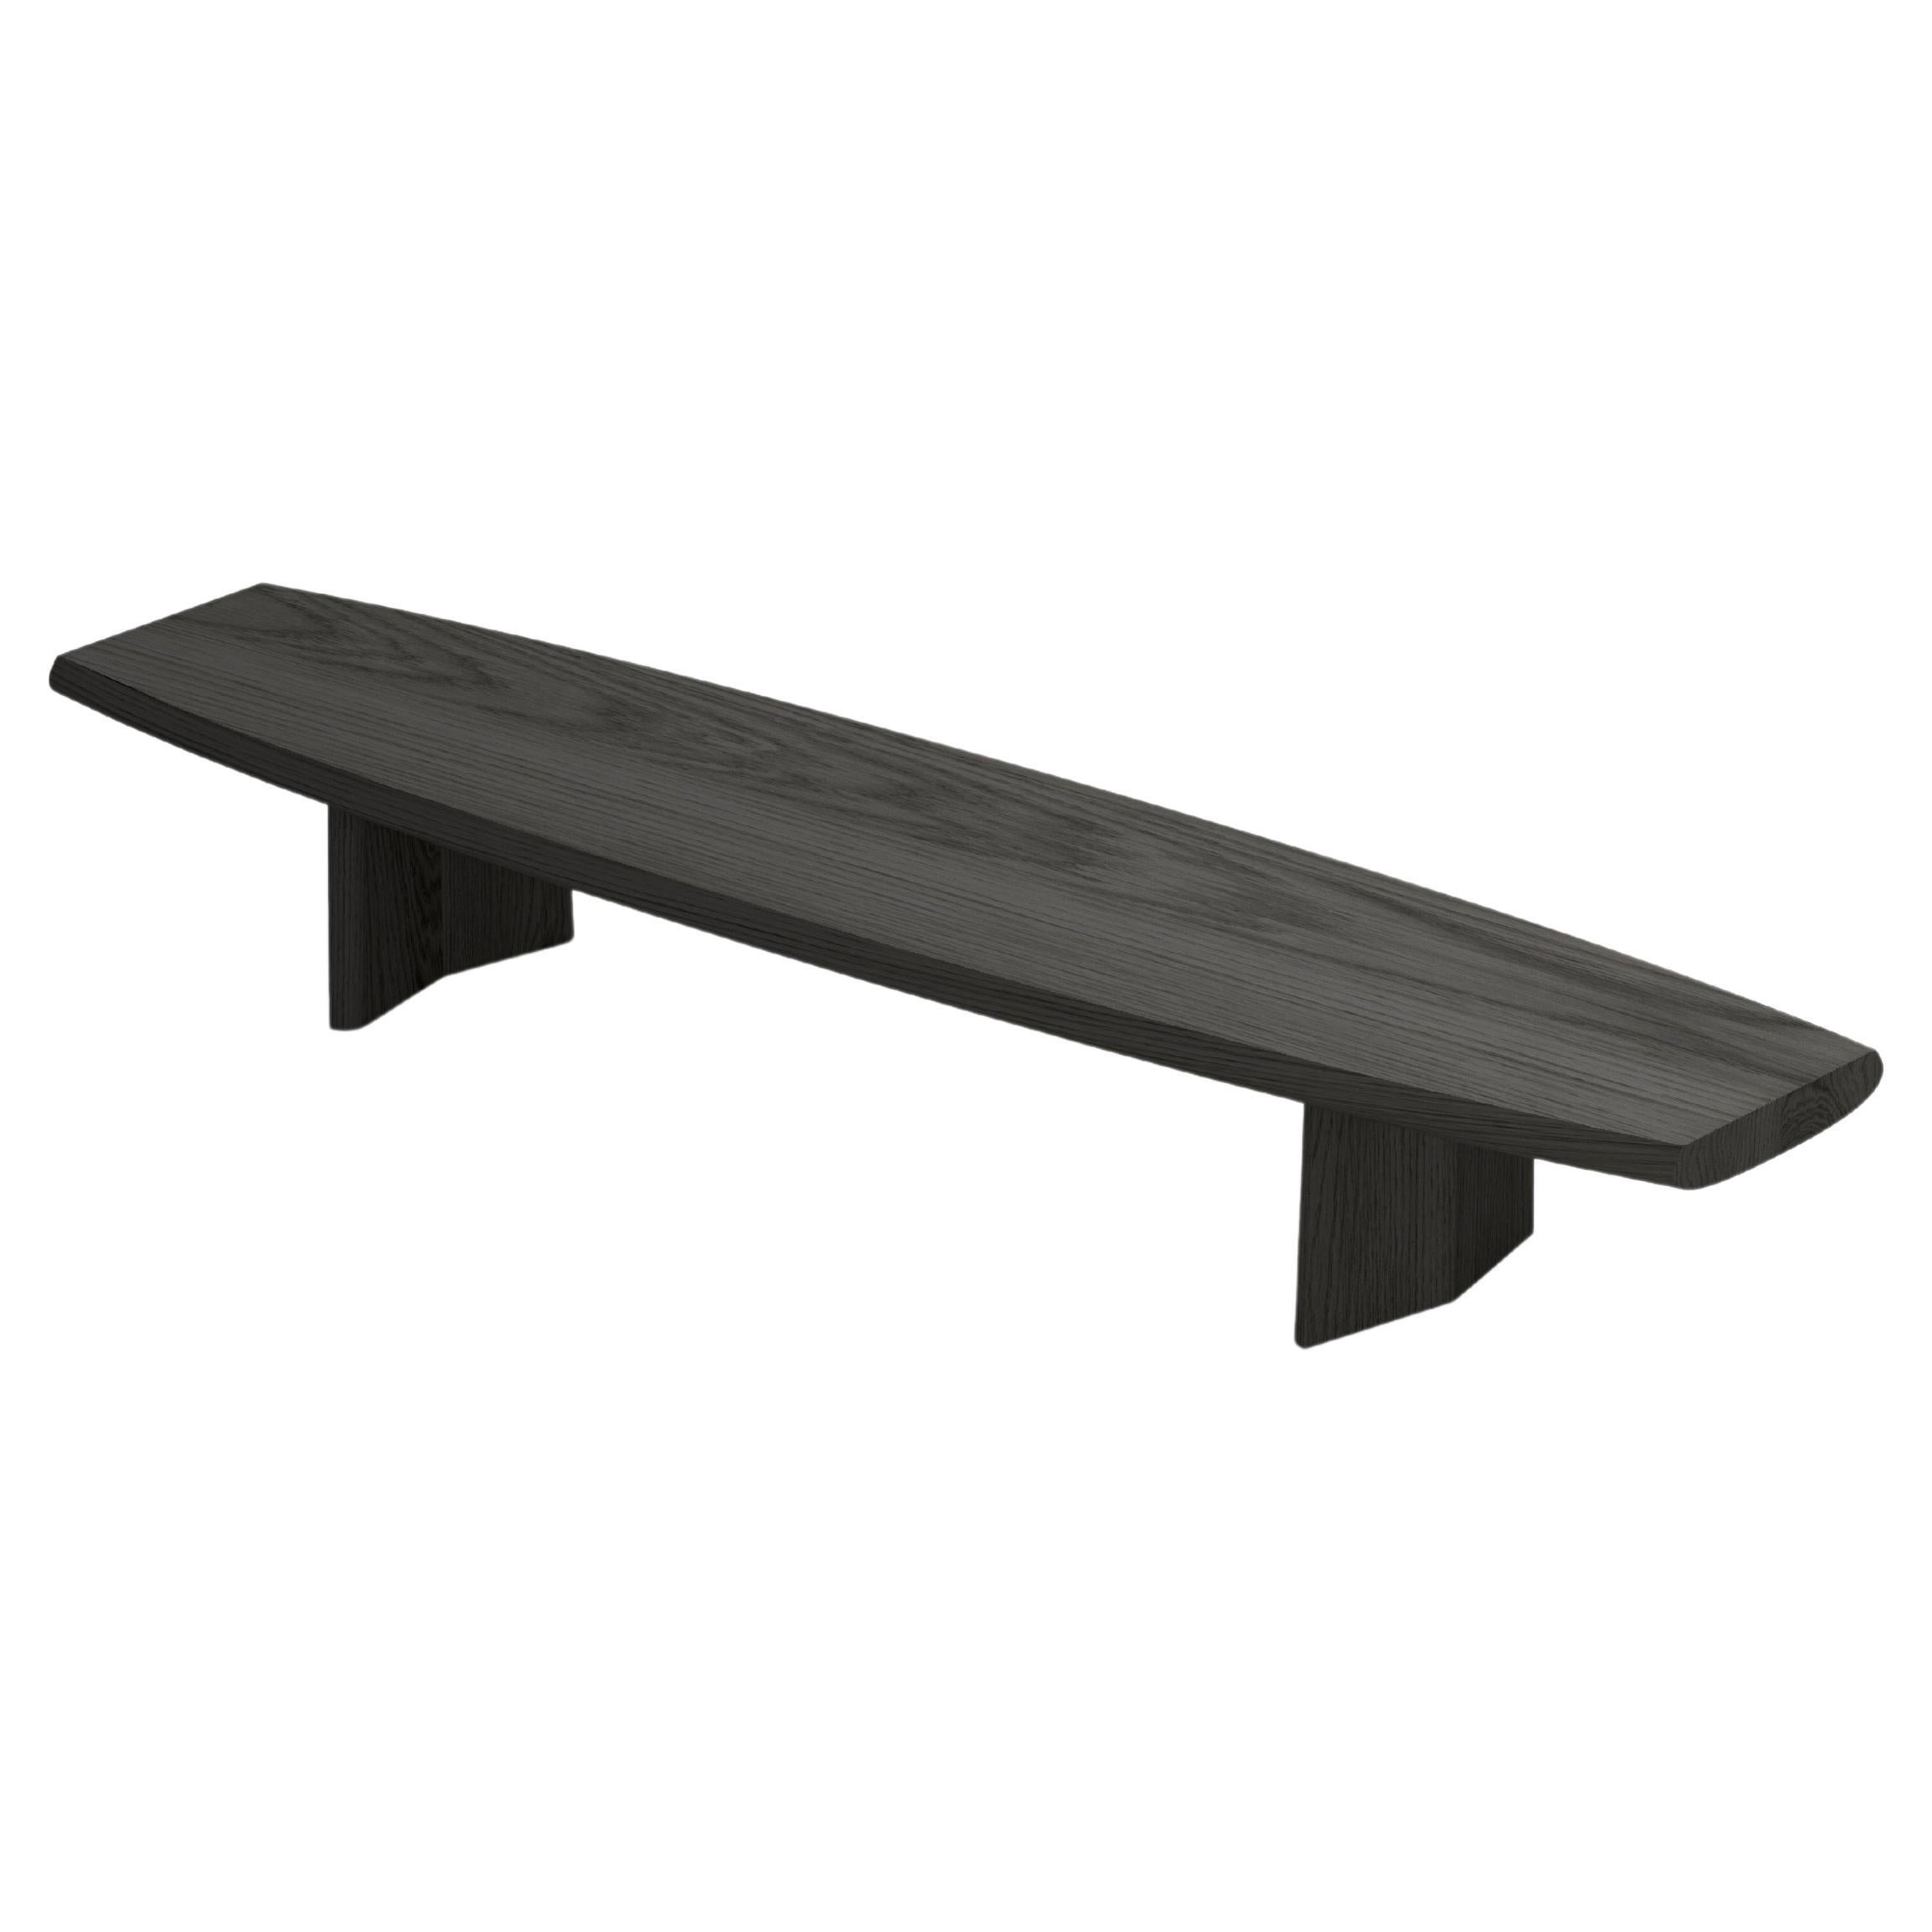 Peana Low Coffee Table, Bench in Black Tinted Wood Finish by Joel Escalona For Sale